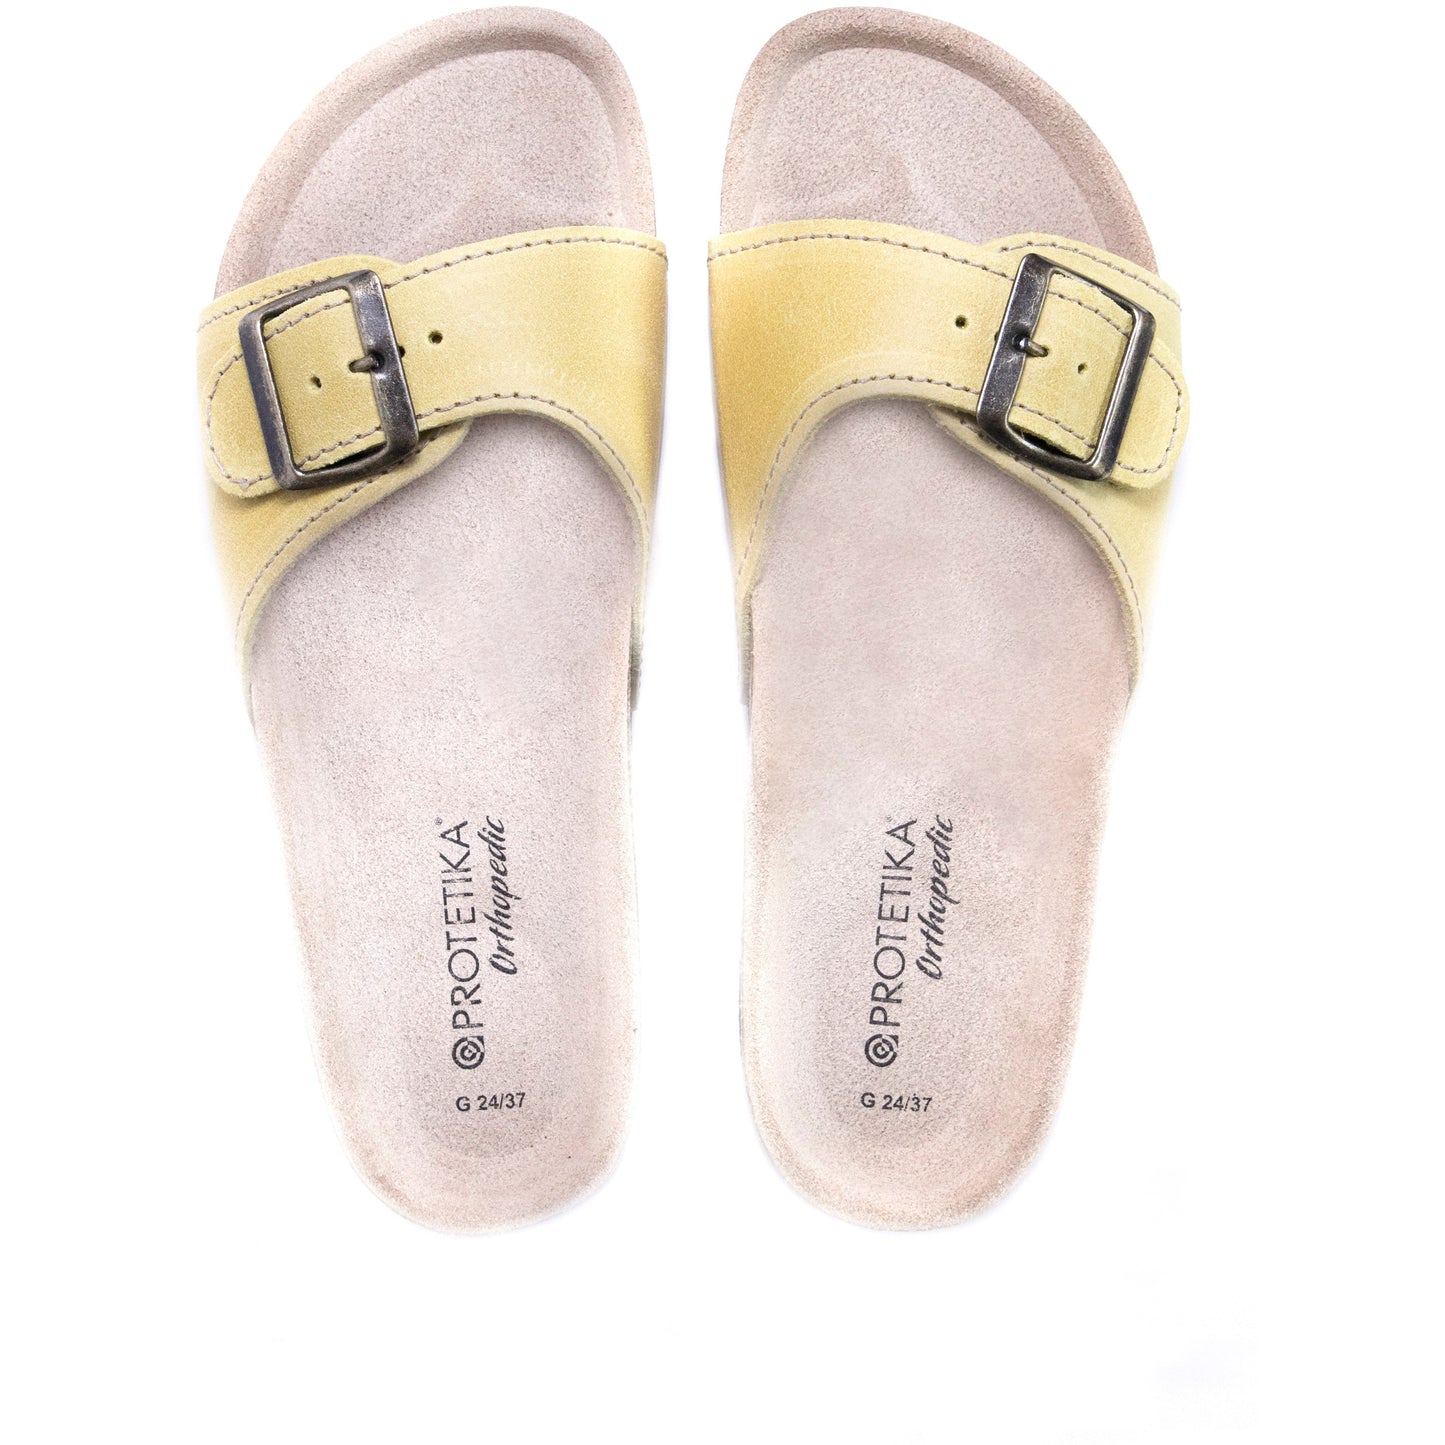 T80: color 70 - yellow ladies orthotic sandals